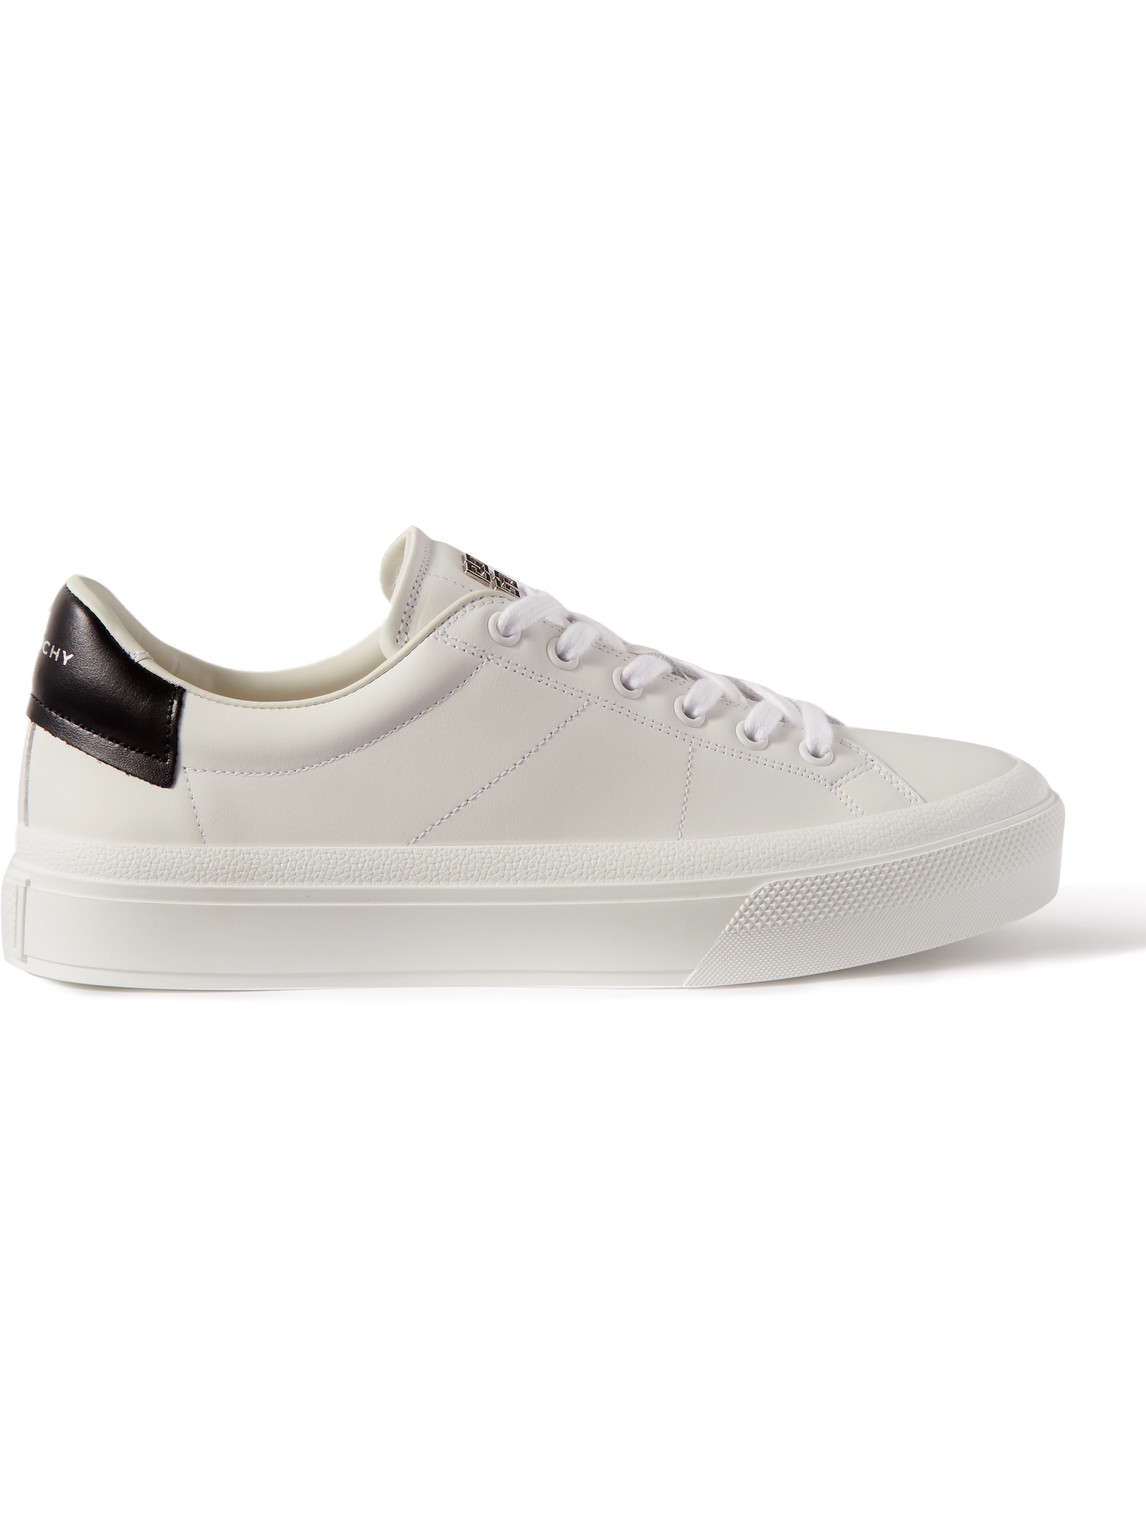 Givenchy City Sport Leather Sneakers In White | ModeSens